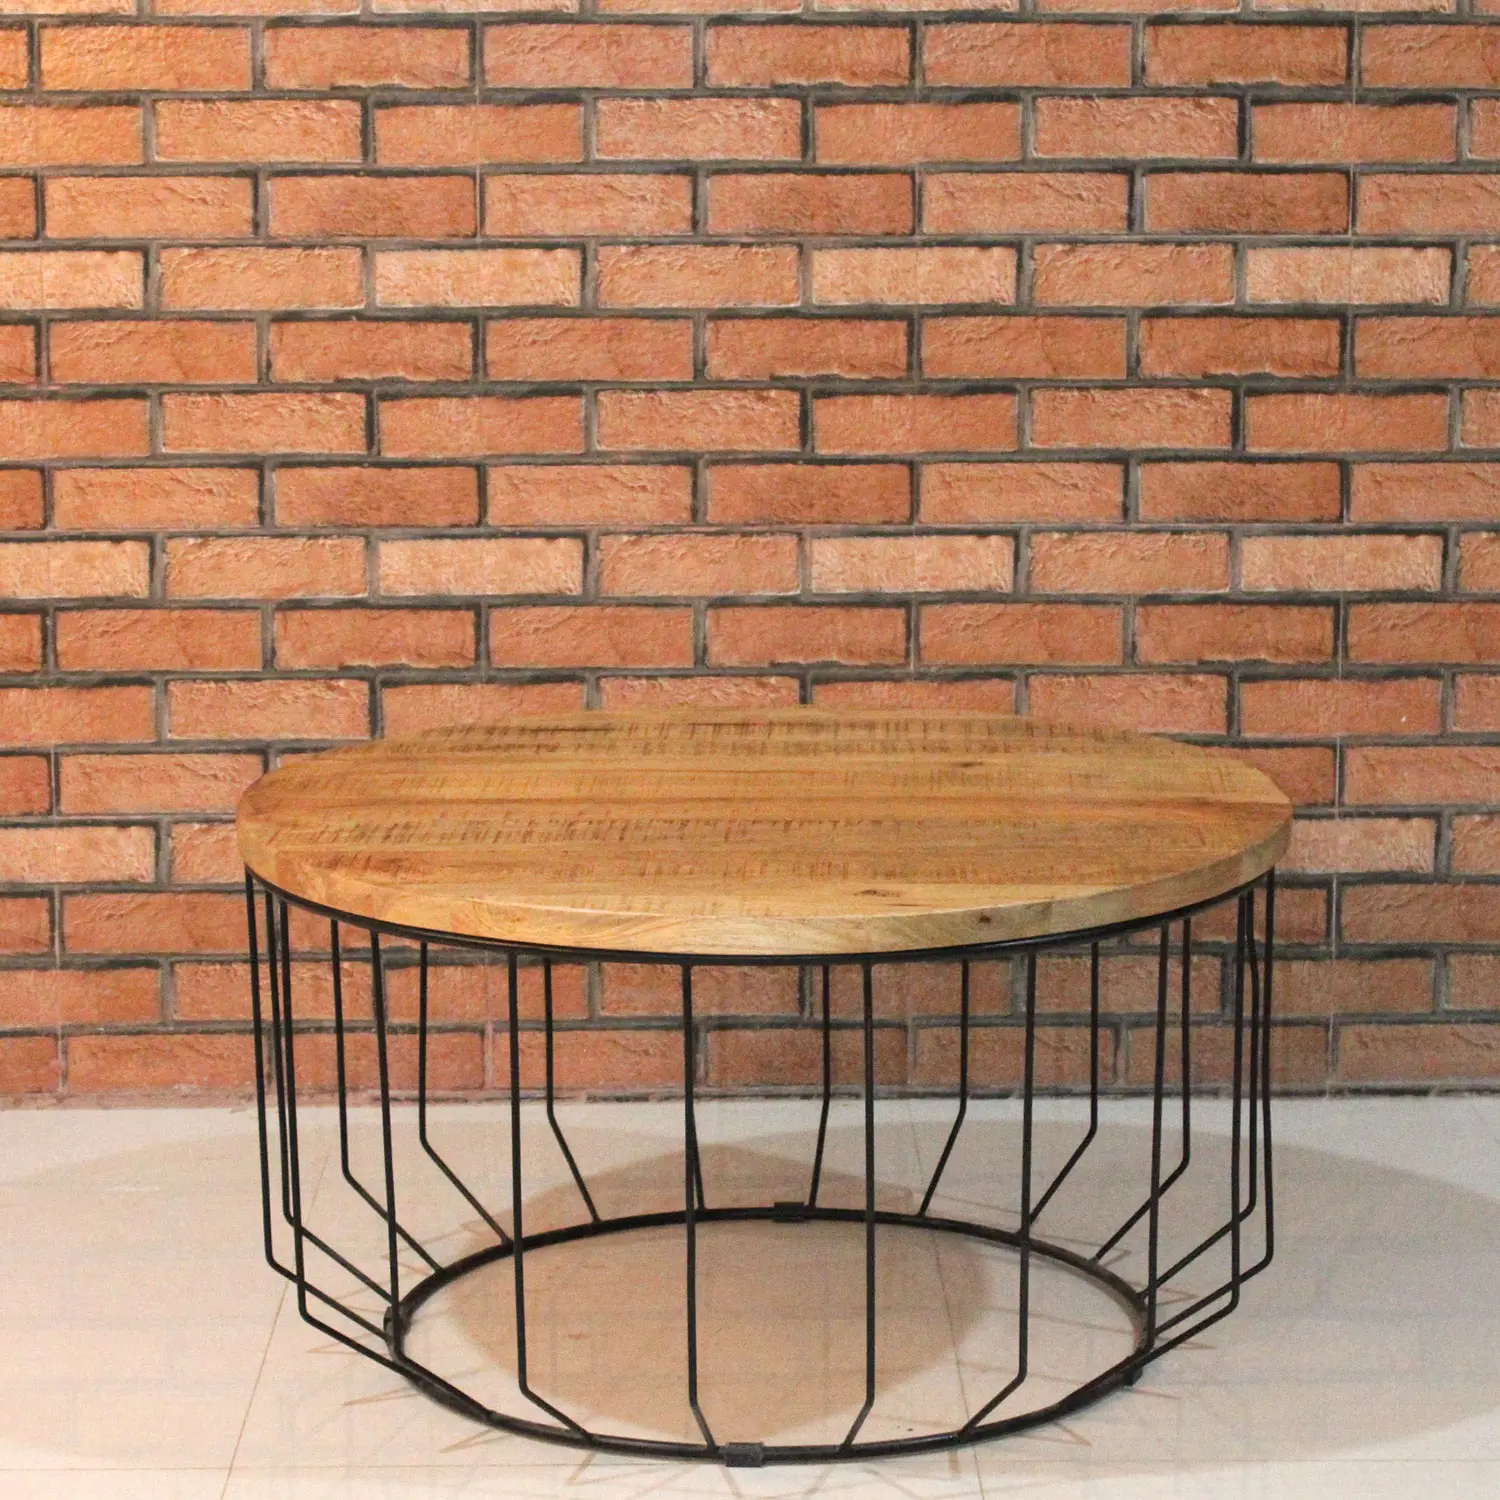 Iron Round Coffee Table with Wooden Top - popular handicrafts